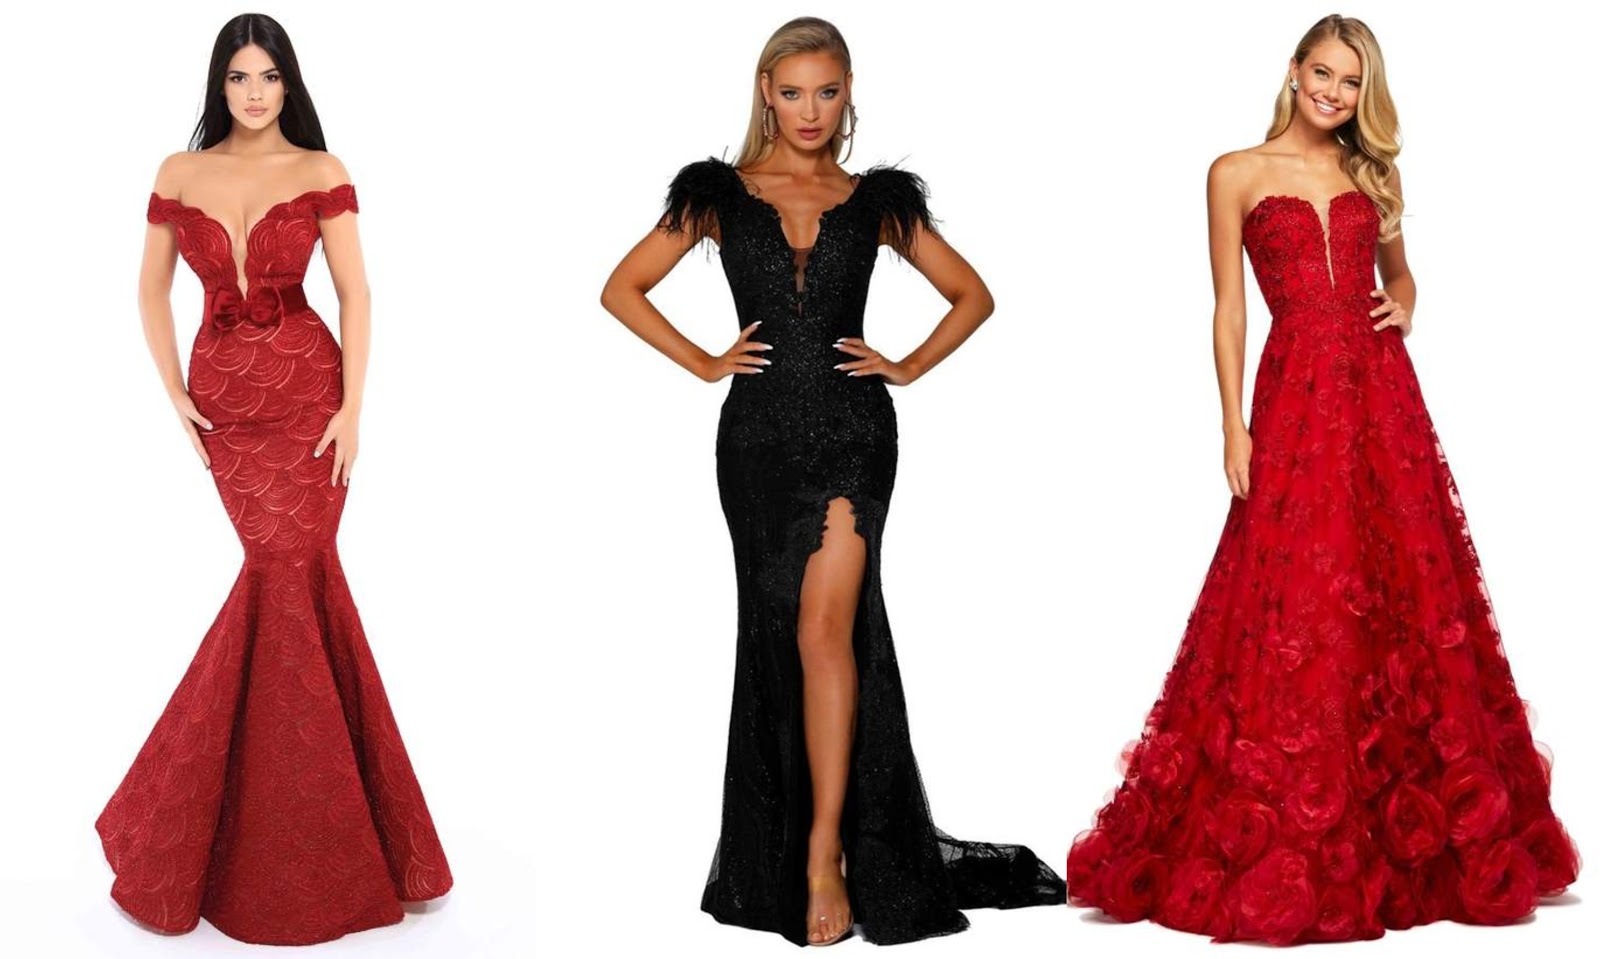 Top Prom Dresses in 2021 for Different Body Shapes